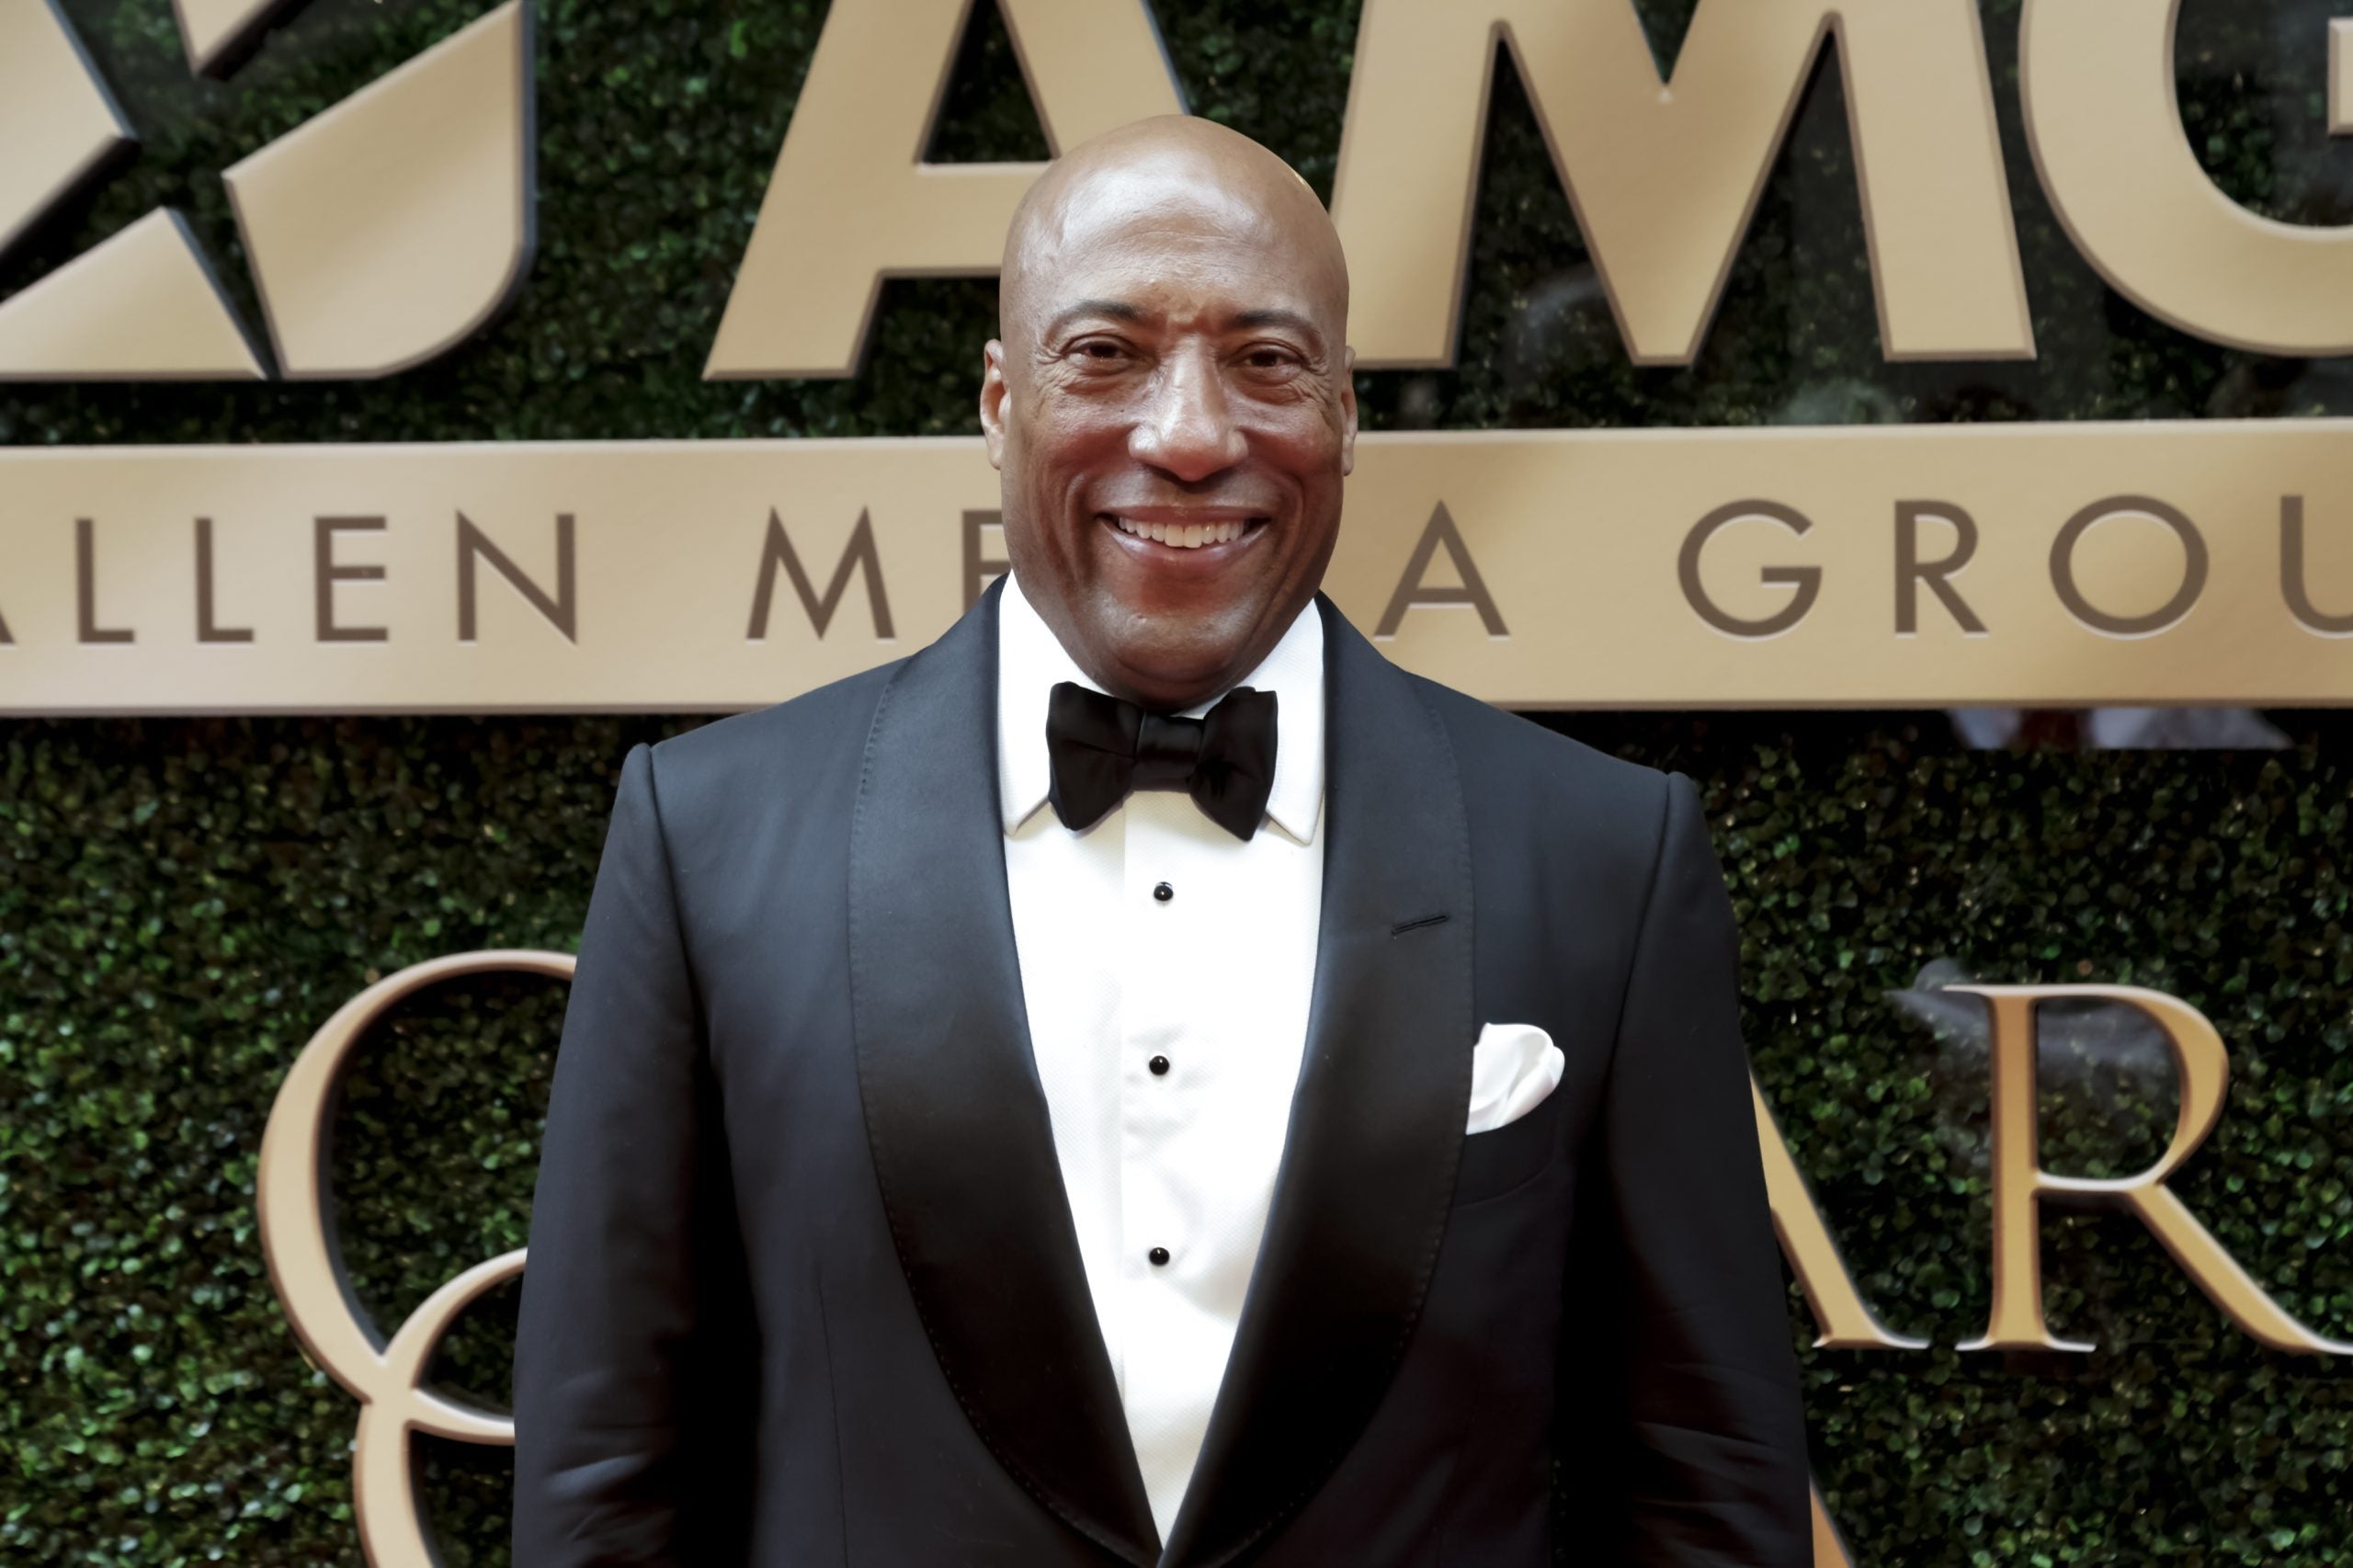 Byron Allen Says He Is "Aggressively" Pursuing Cable Networks: "We Are Very Acquisitive"